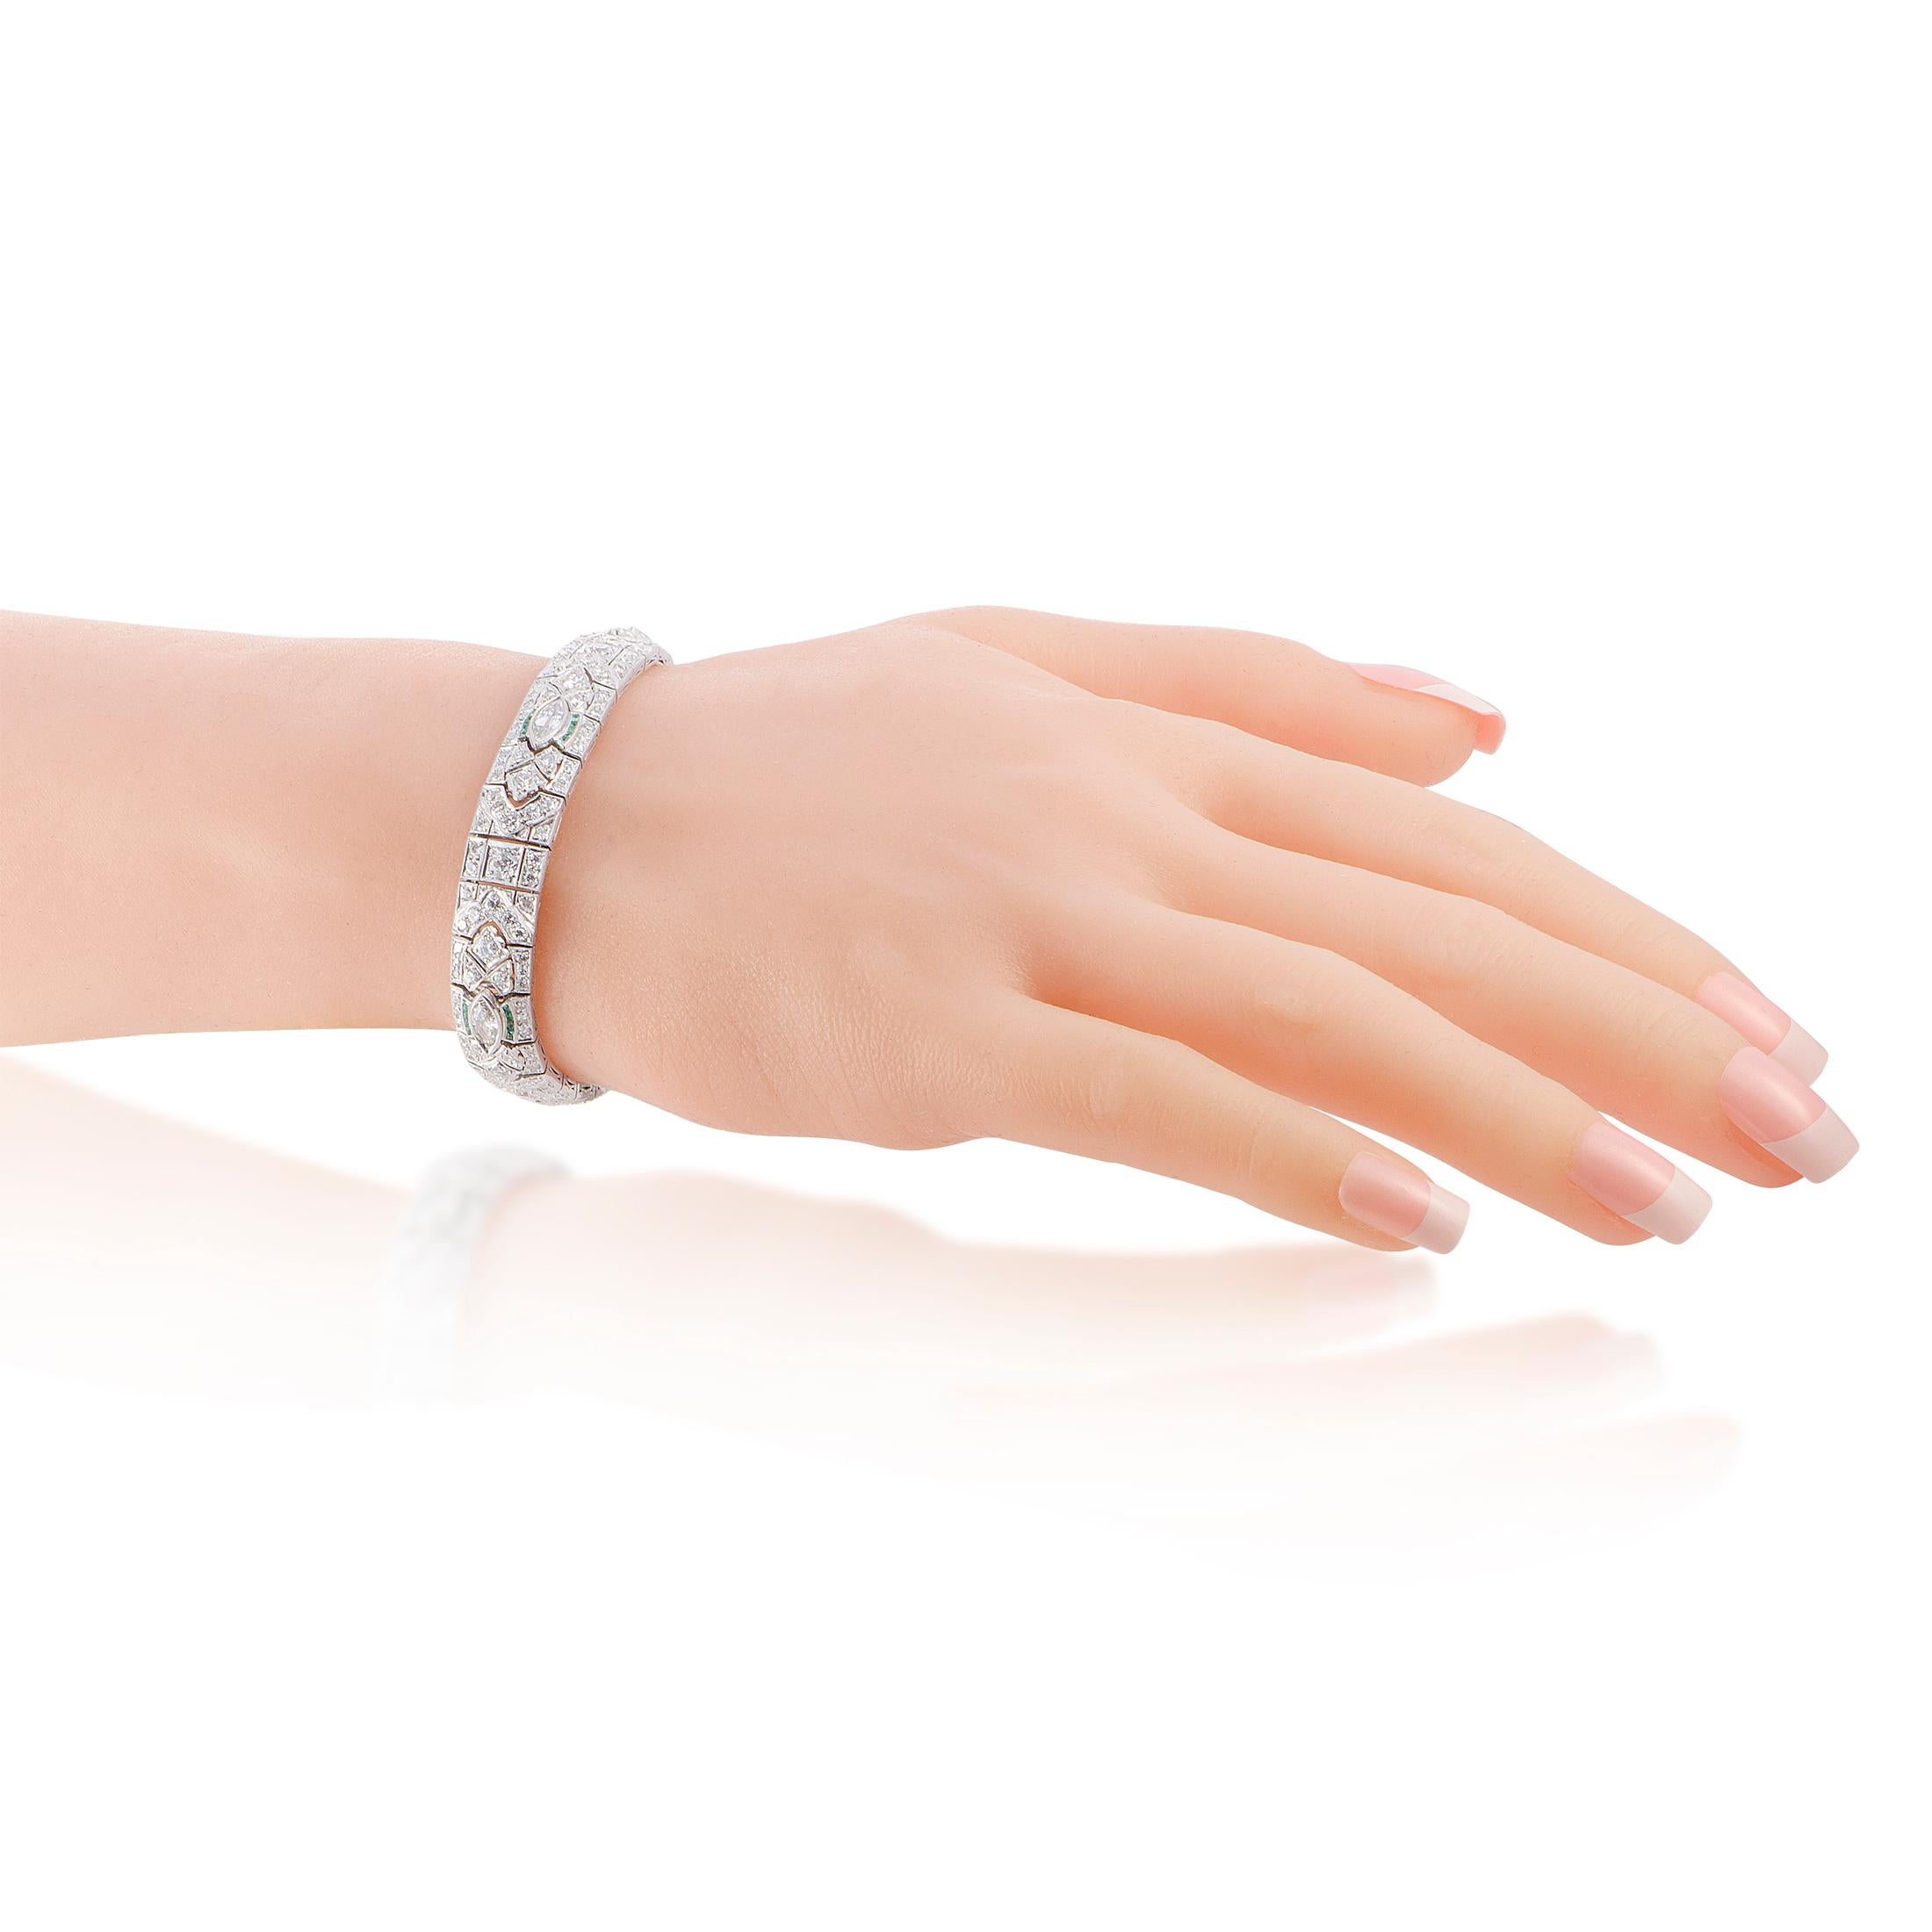 This LB Exclusive bracelet is crafted from platinum and set with diamonds and emeralds. The emeralds amount to 1.50 carats and the diamonds total approximately 8.25 carats. The bracelet weighs 38.1 grams and measures 7.50” in length.

Offered in